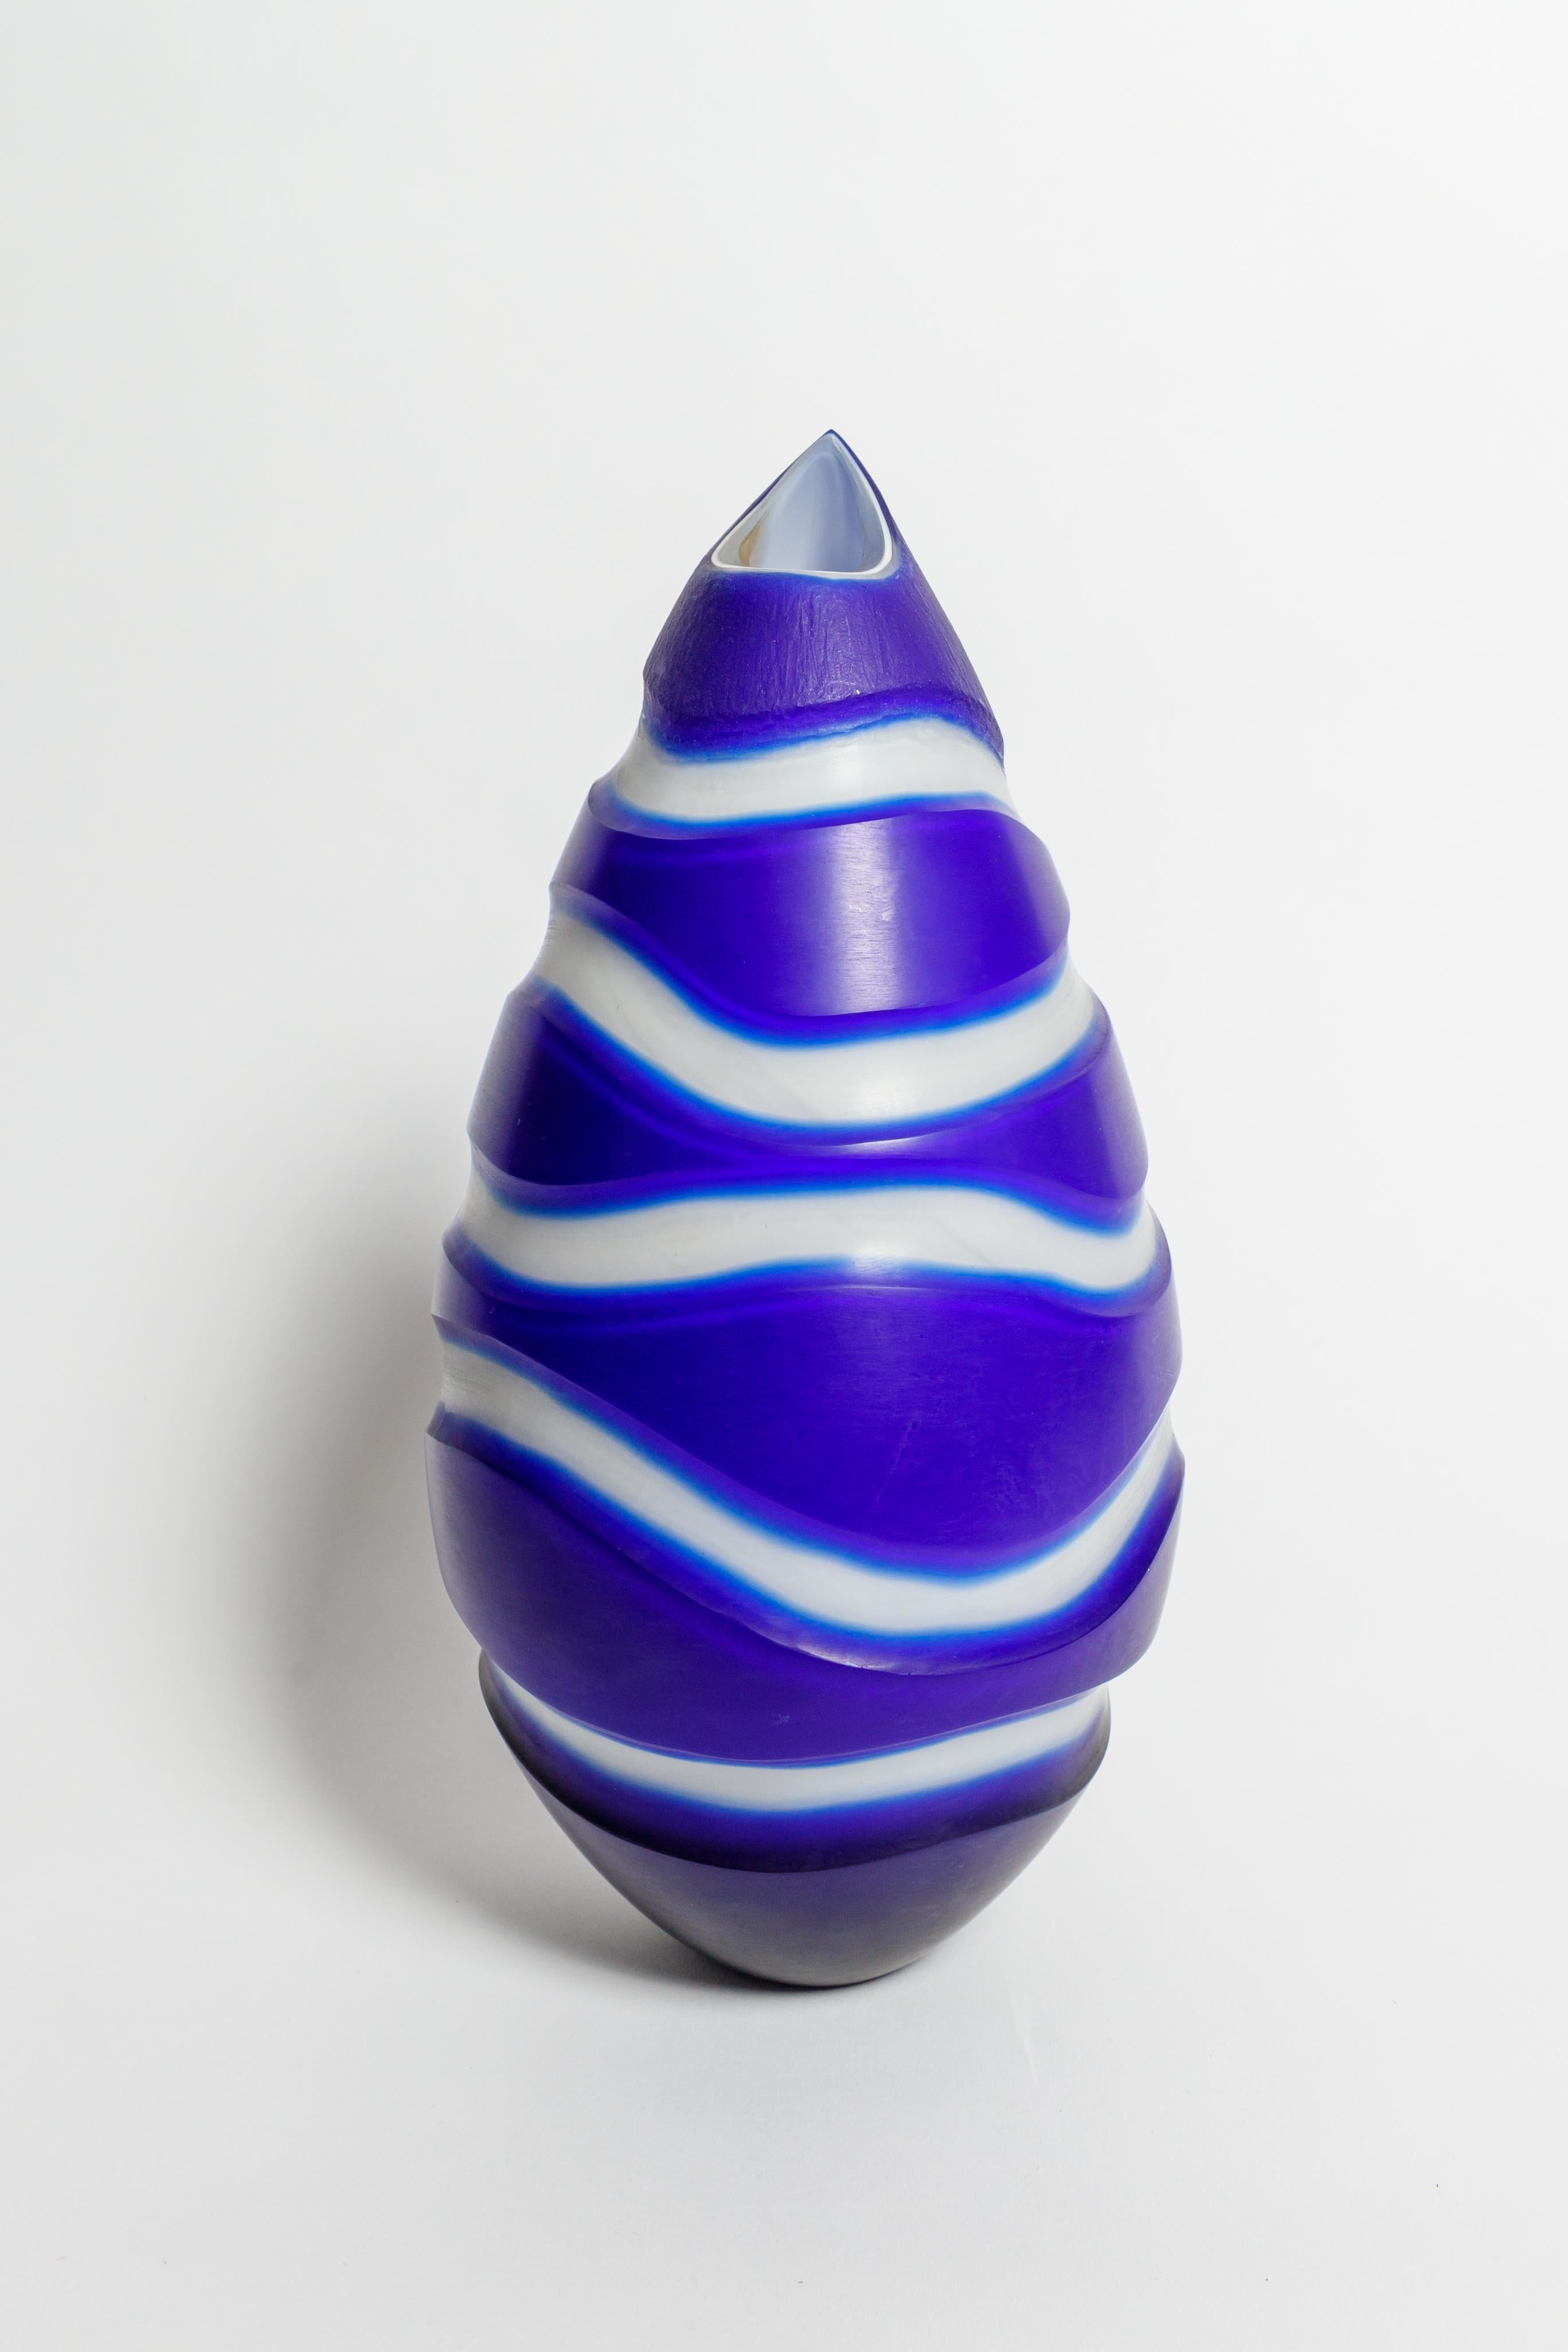 Mid-Century Modern Blue Murano Tear Drop Vase with Incised Linear Design, Signed